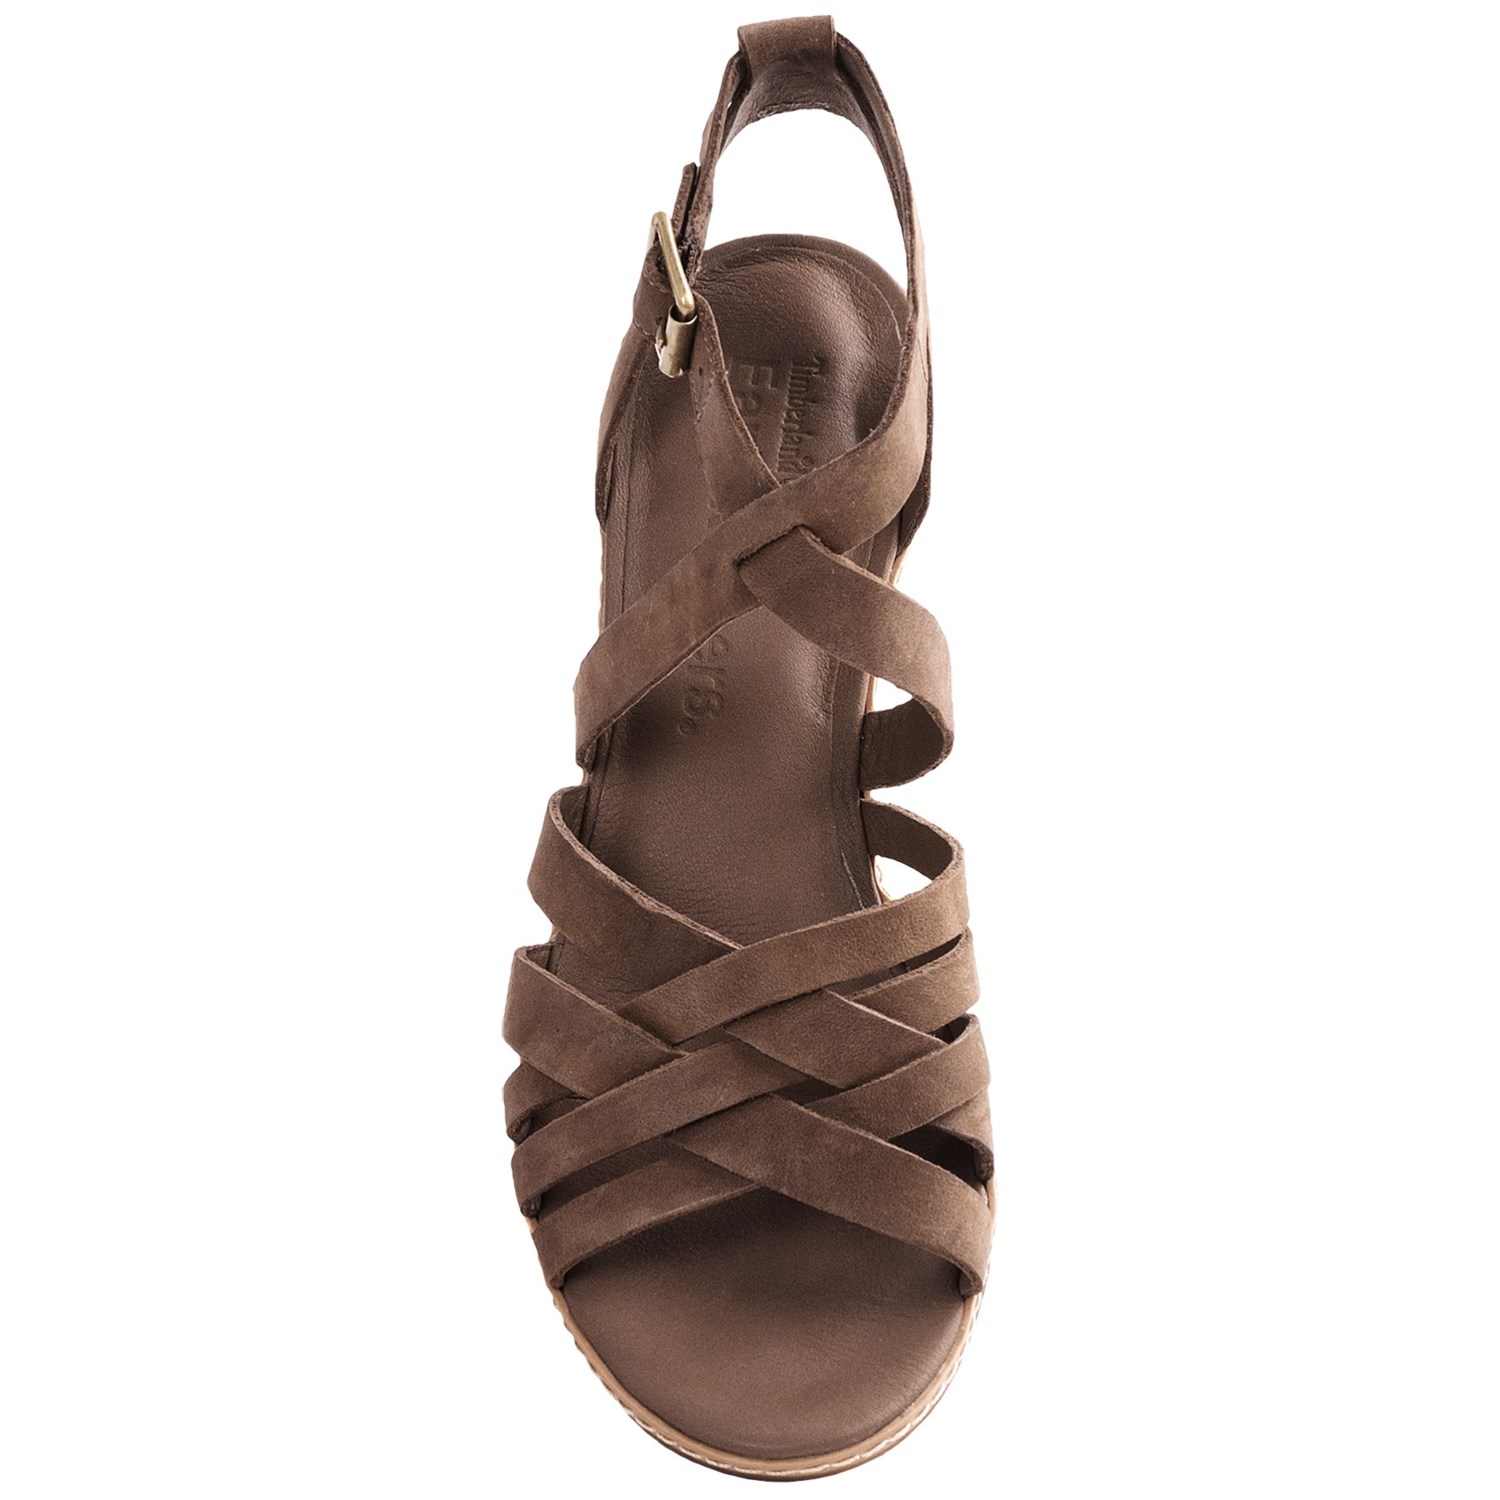 Timberland Earthkeepers Montvale Woven Sandals (For Women) 6585T - Save 69%